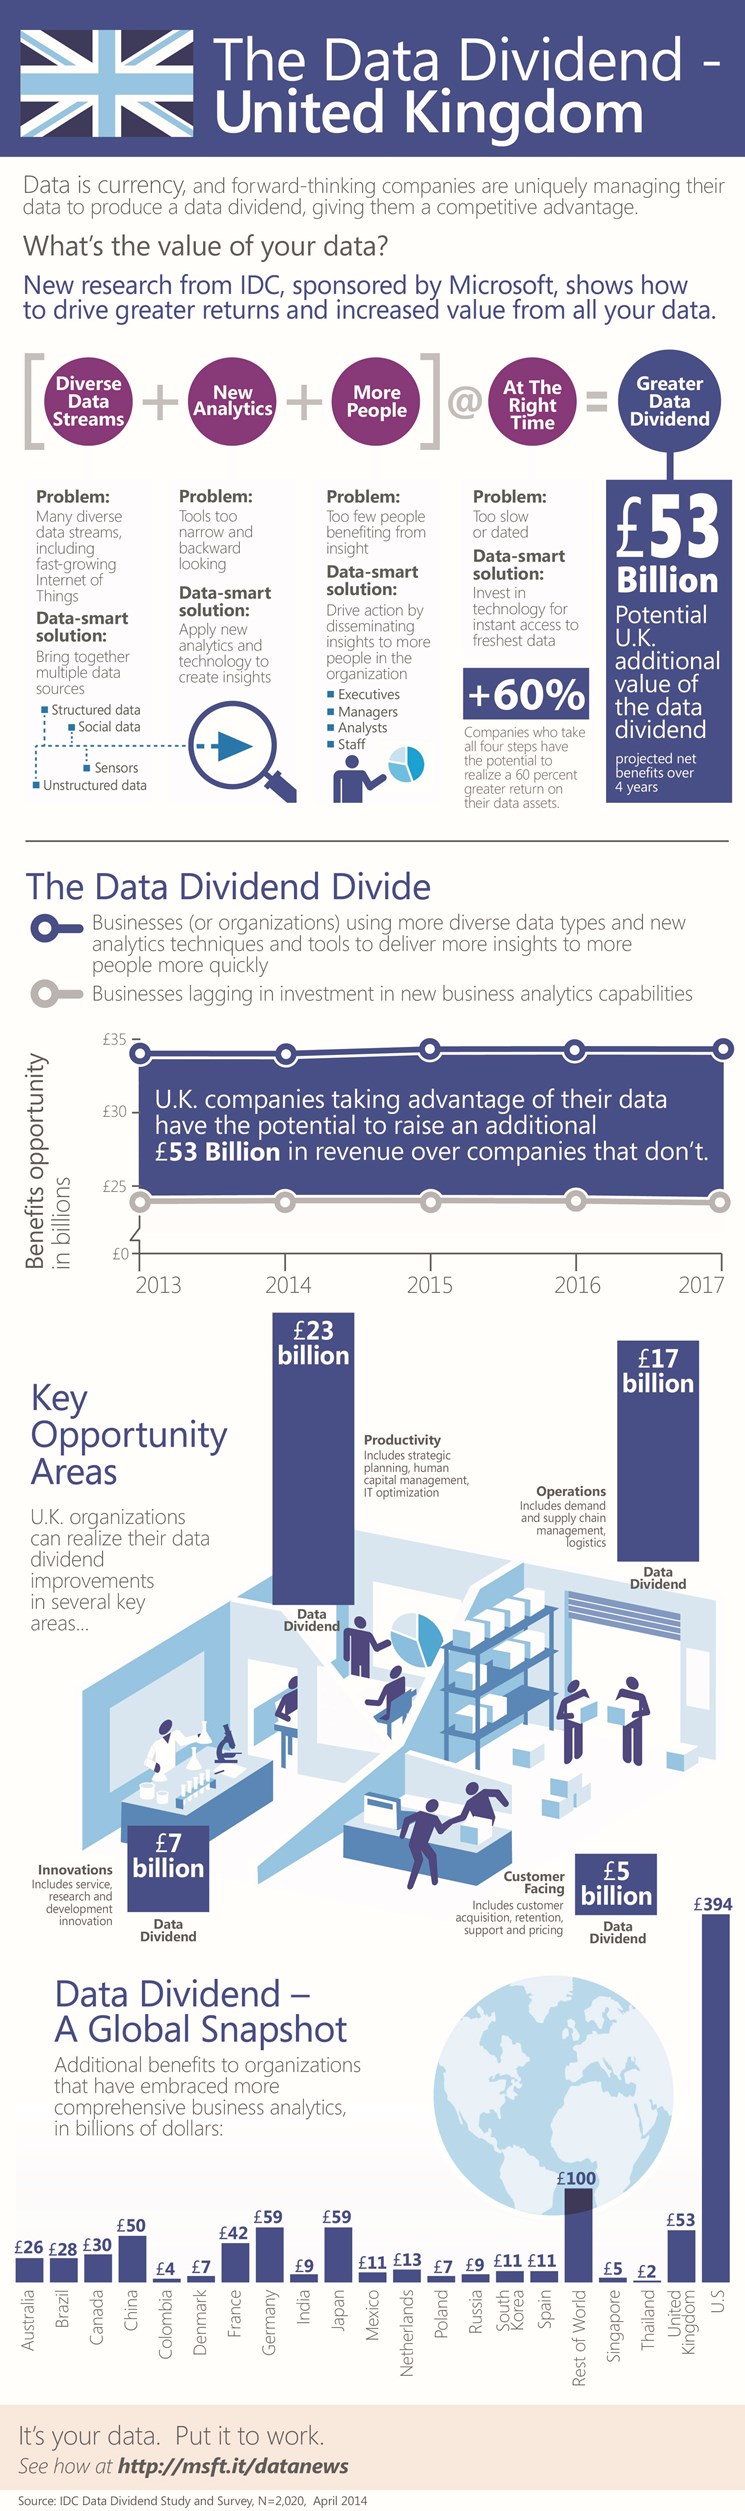 The UK Data Dividend